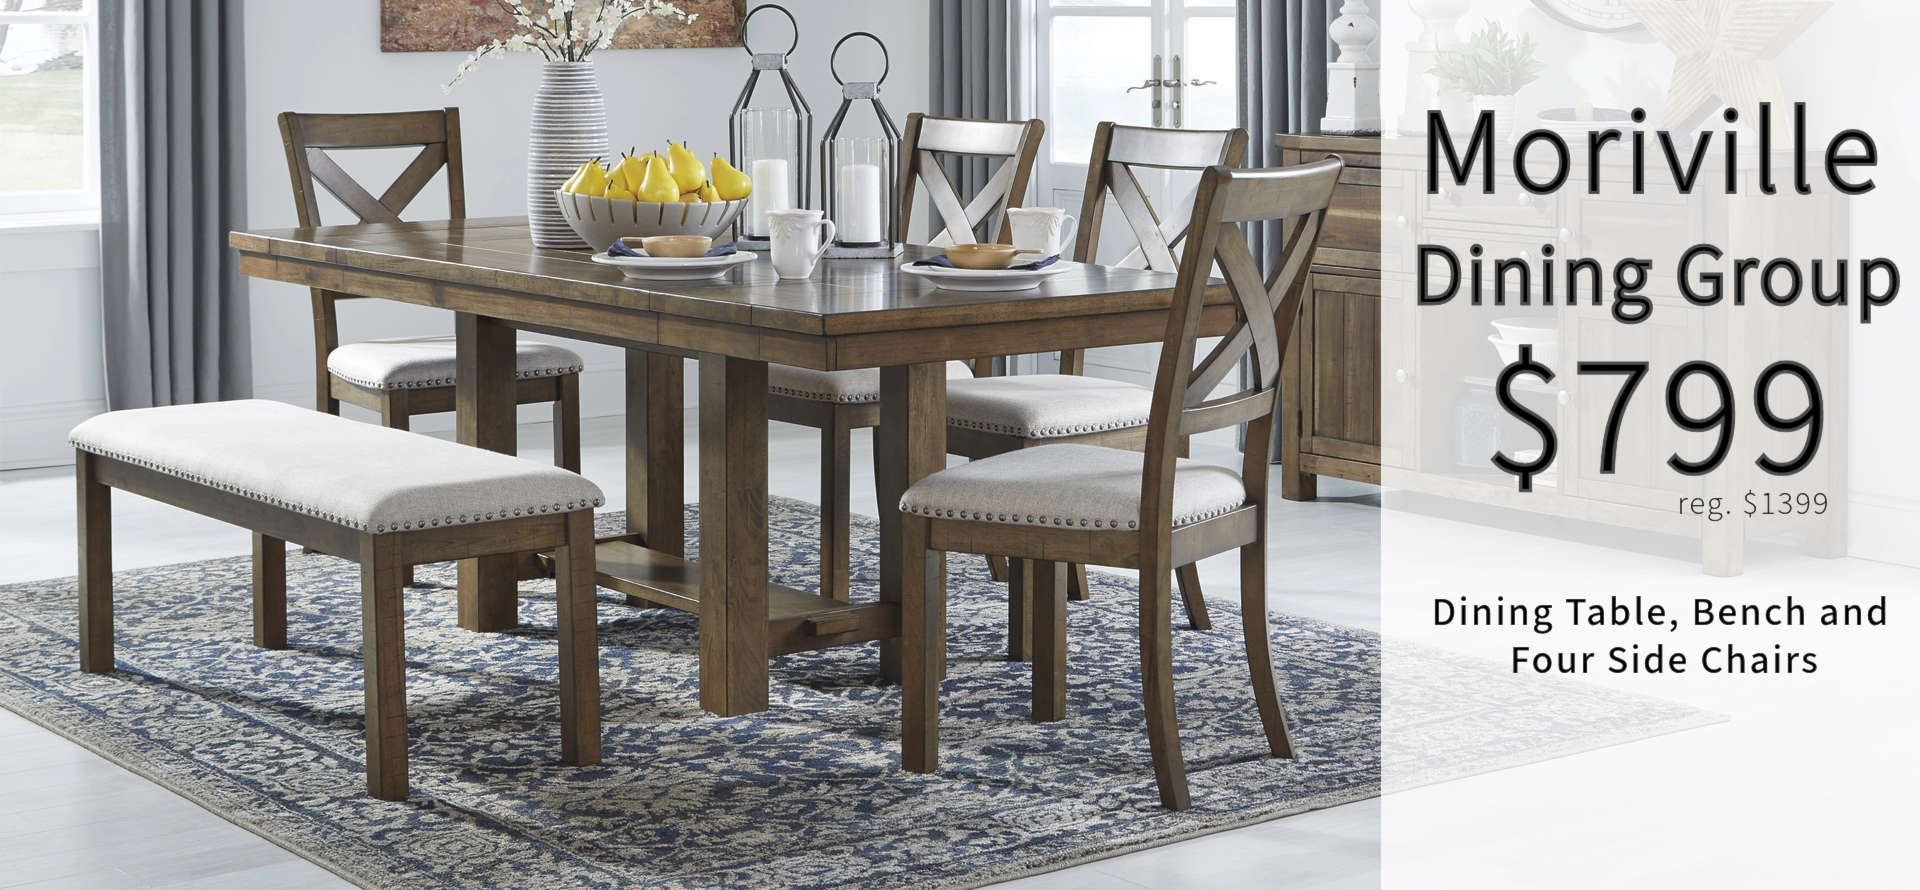 D631 Moriville 6 Piece dining group with table, bench and 4 side chairs